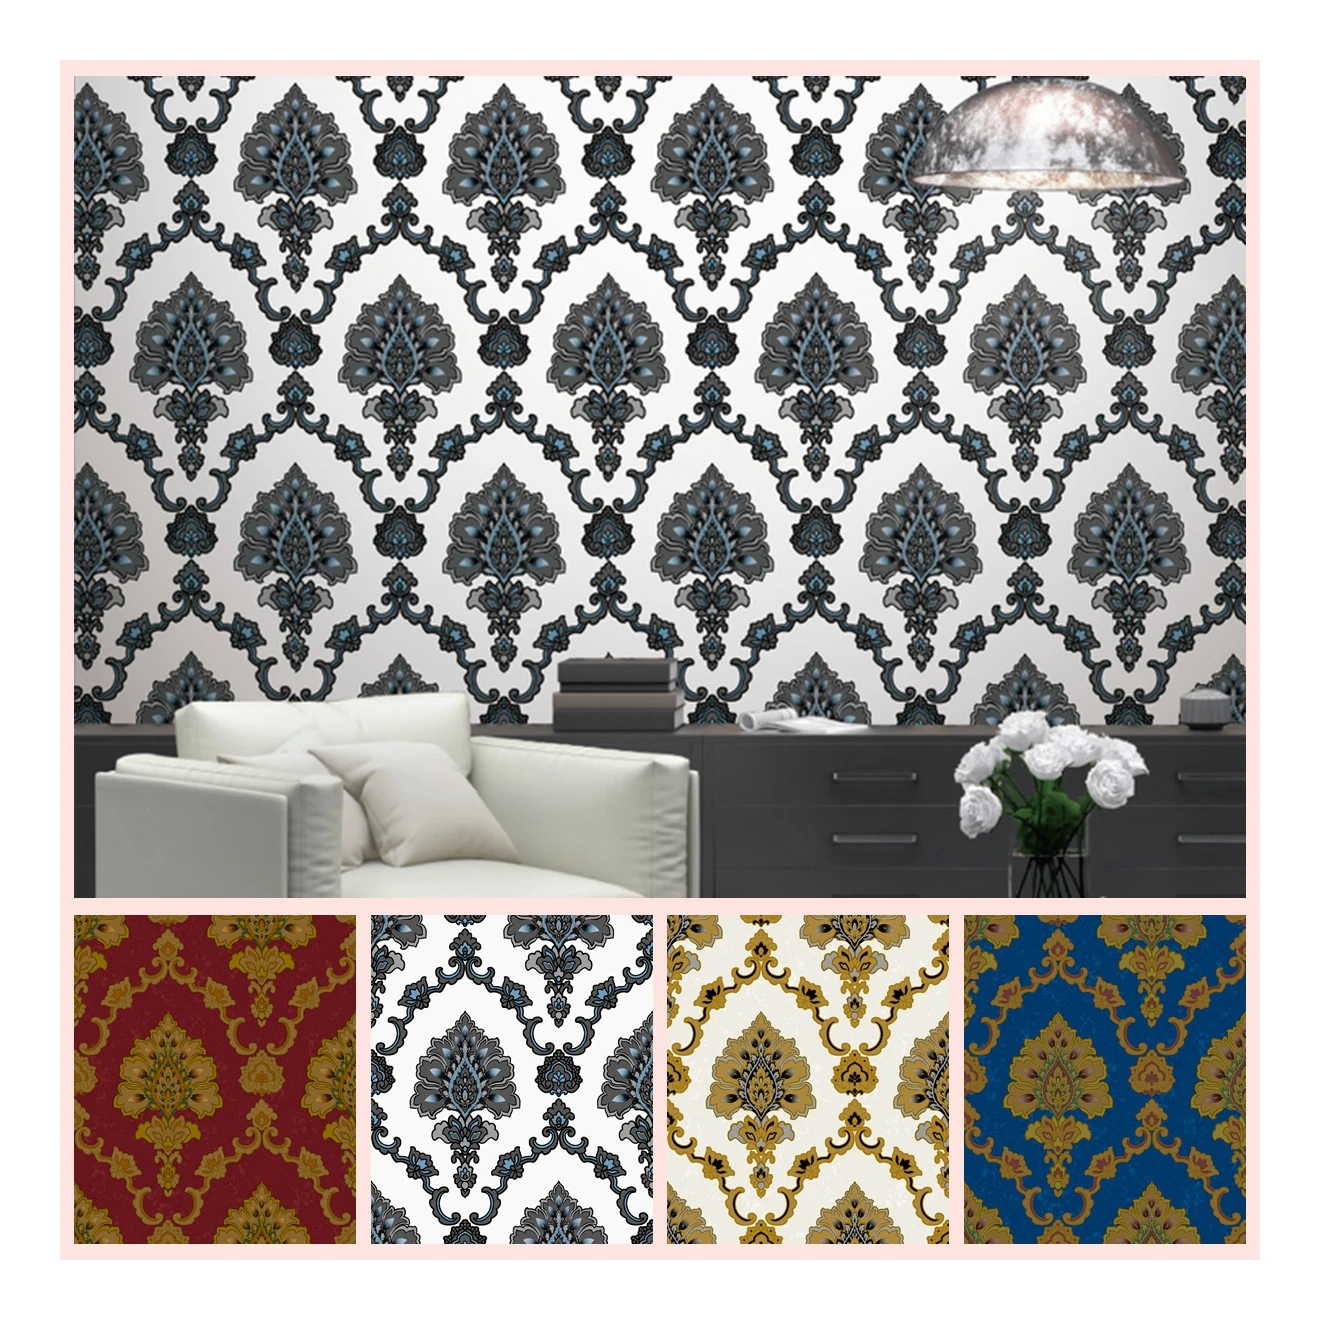 
Classic 3d wallpaper for bedroom living room wall paper decoration from China factory 